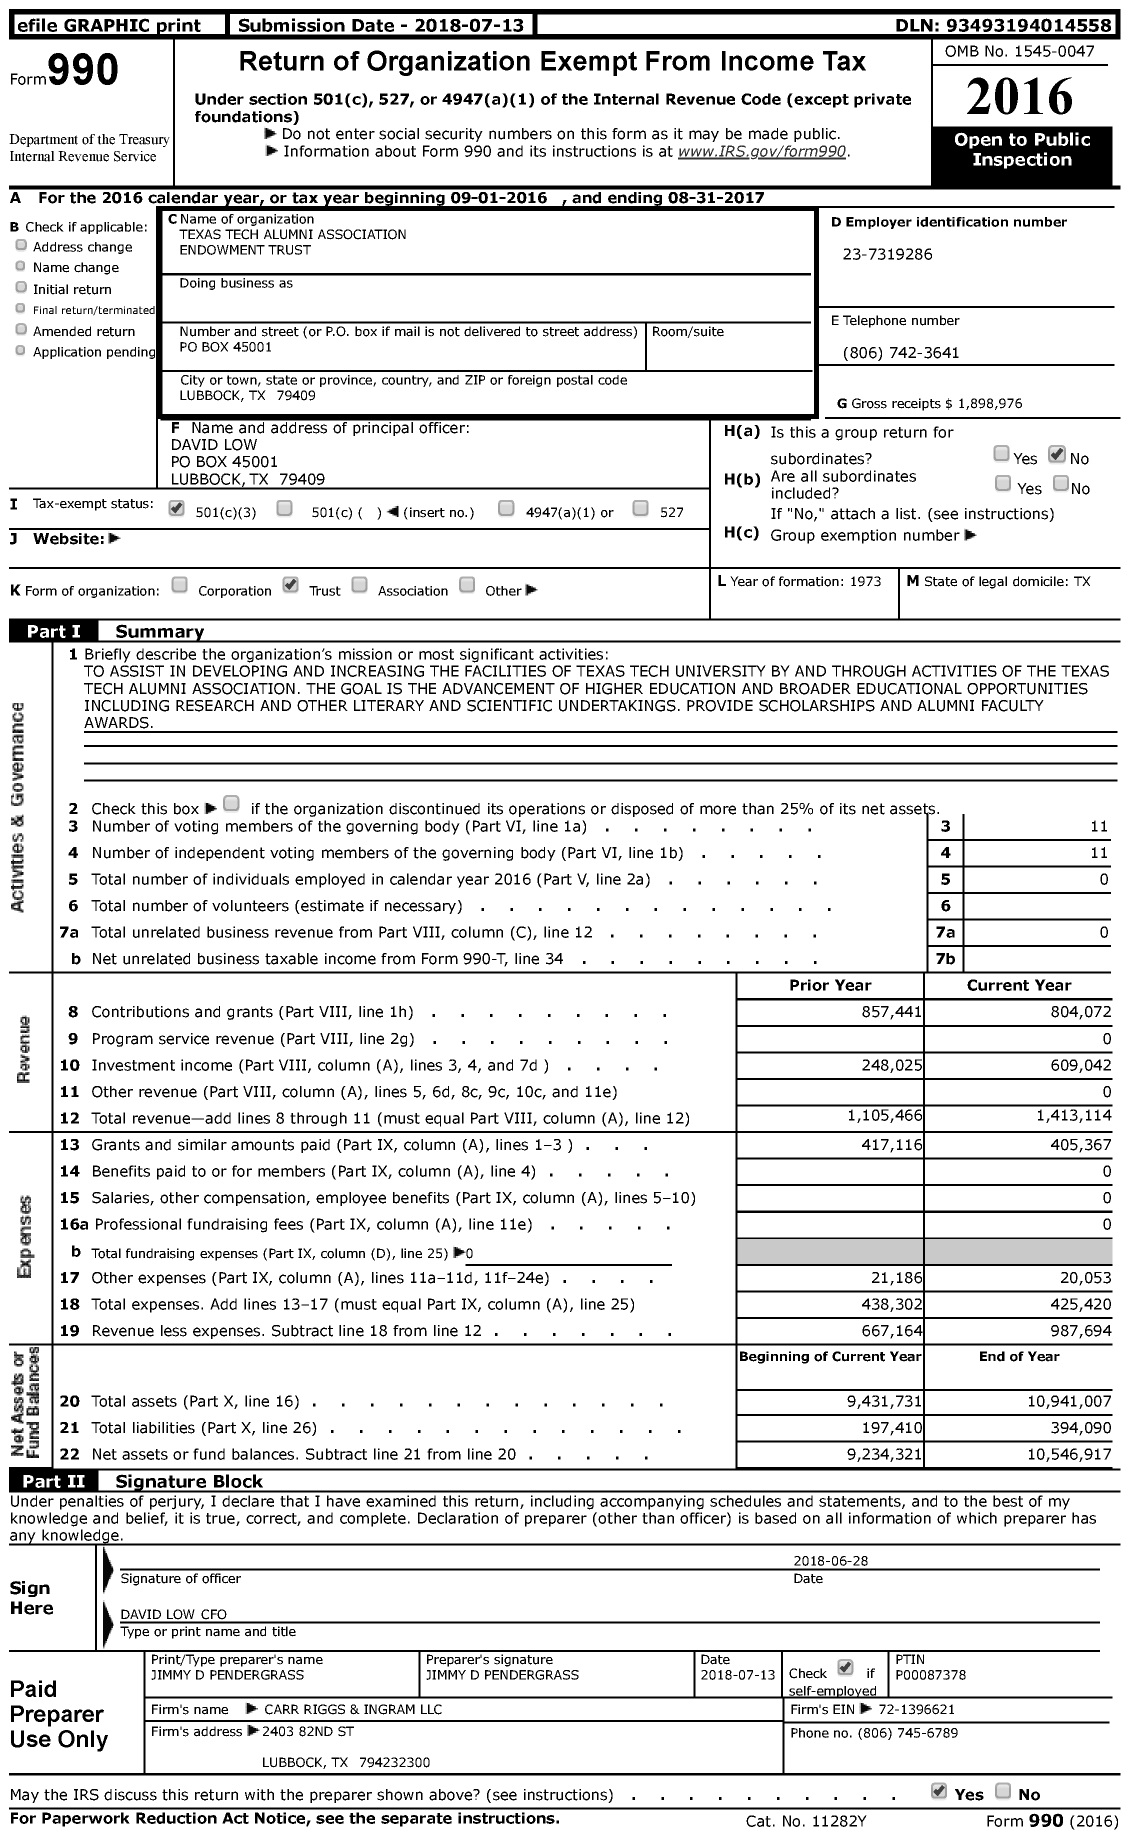 Image of first page of 2016 Form 990 for Texas Tech Alumni Association Endowment Trust